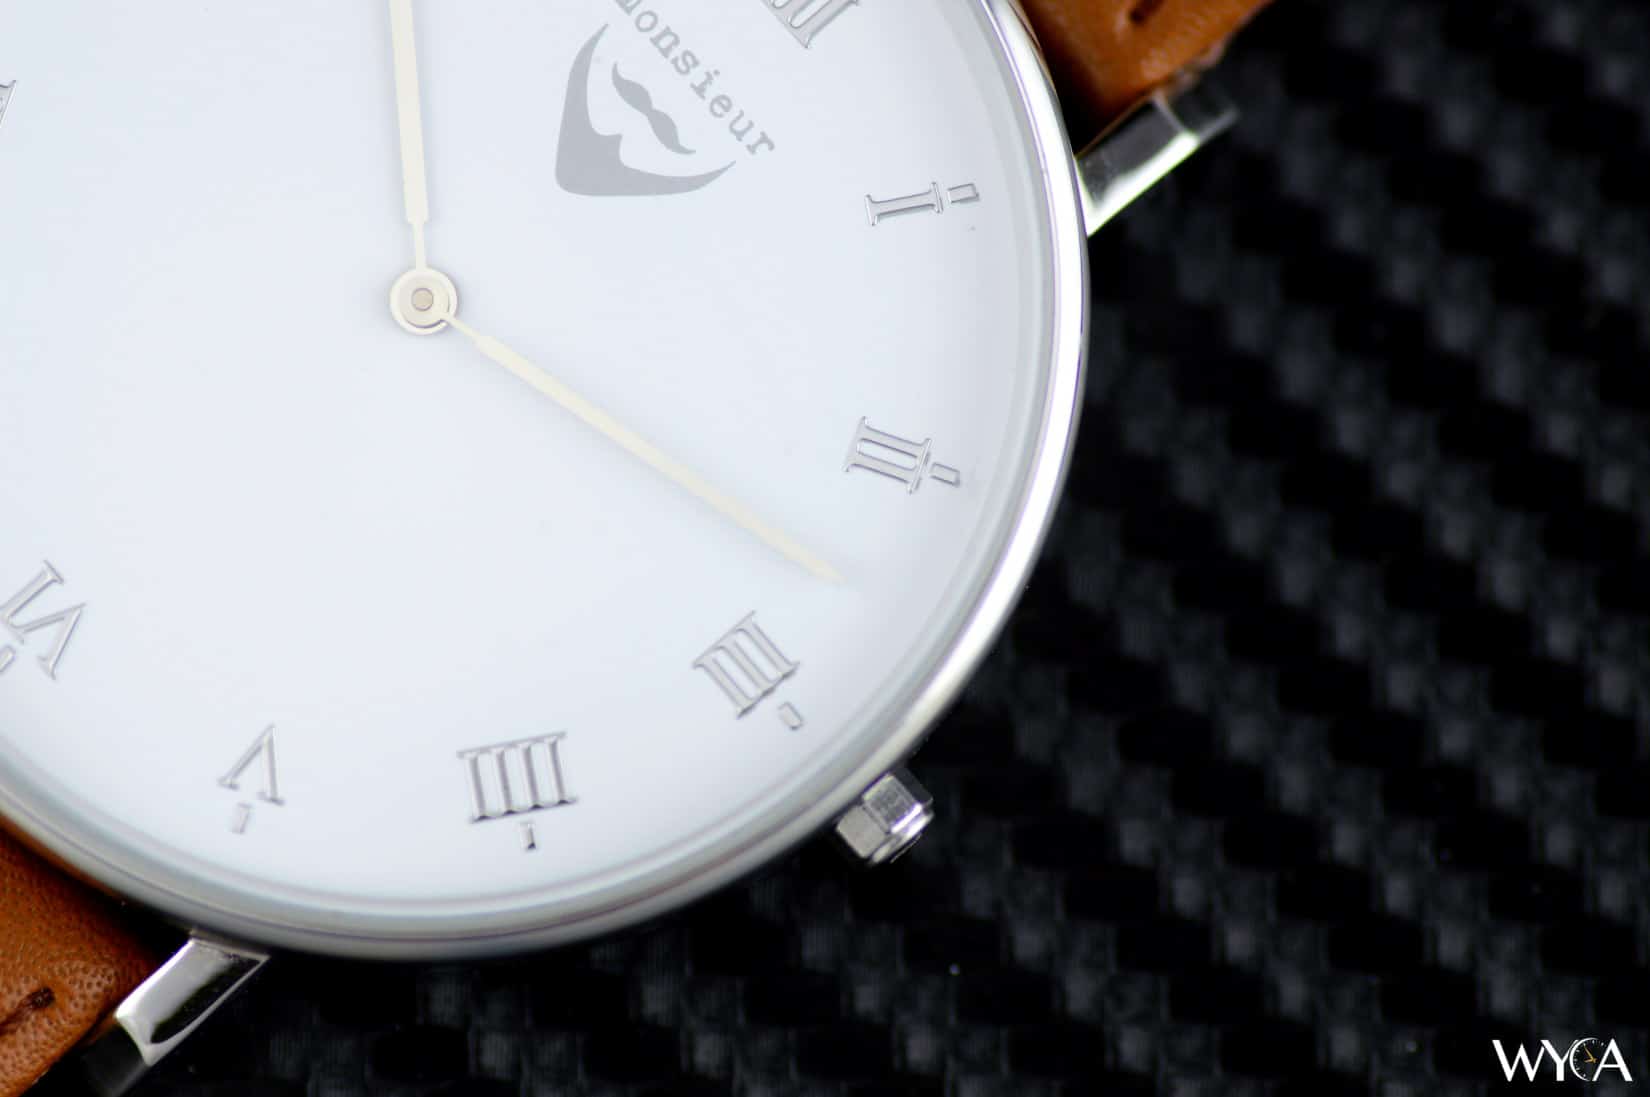 Monsieur Watch Co. Marvin Collection